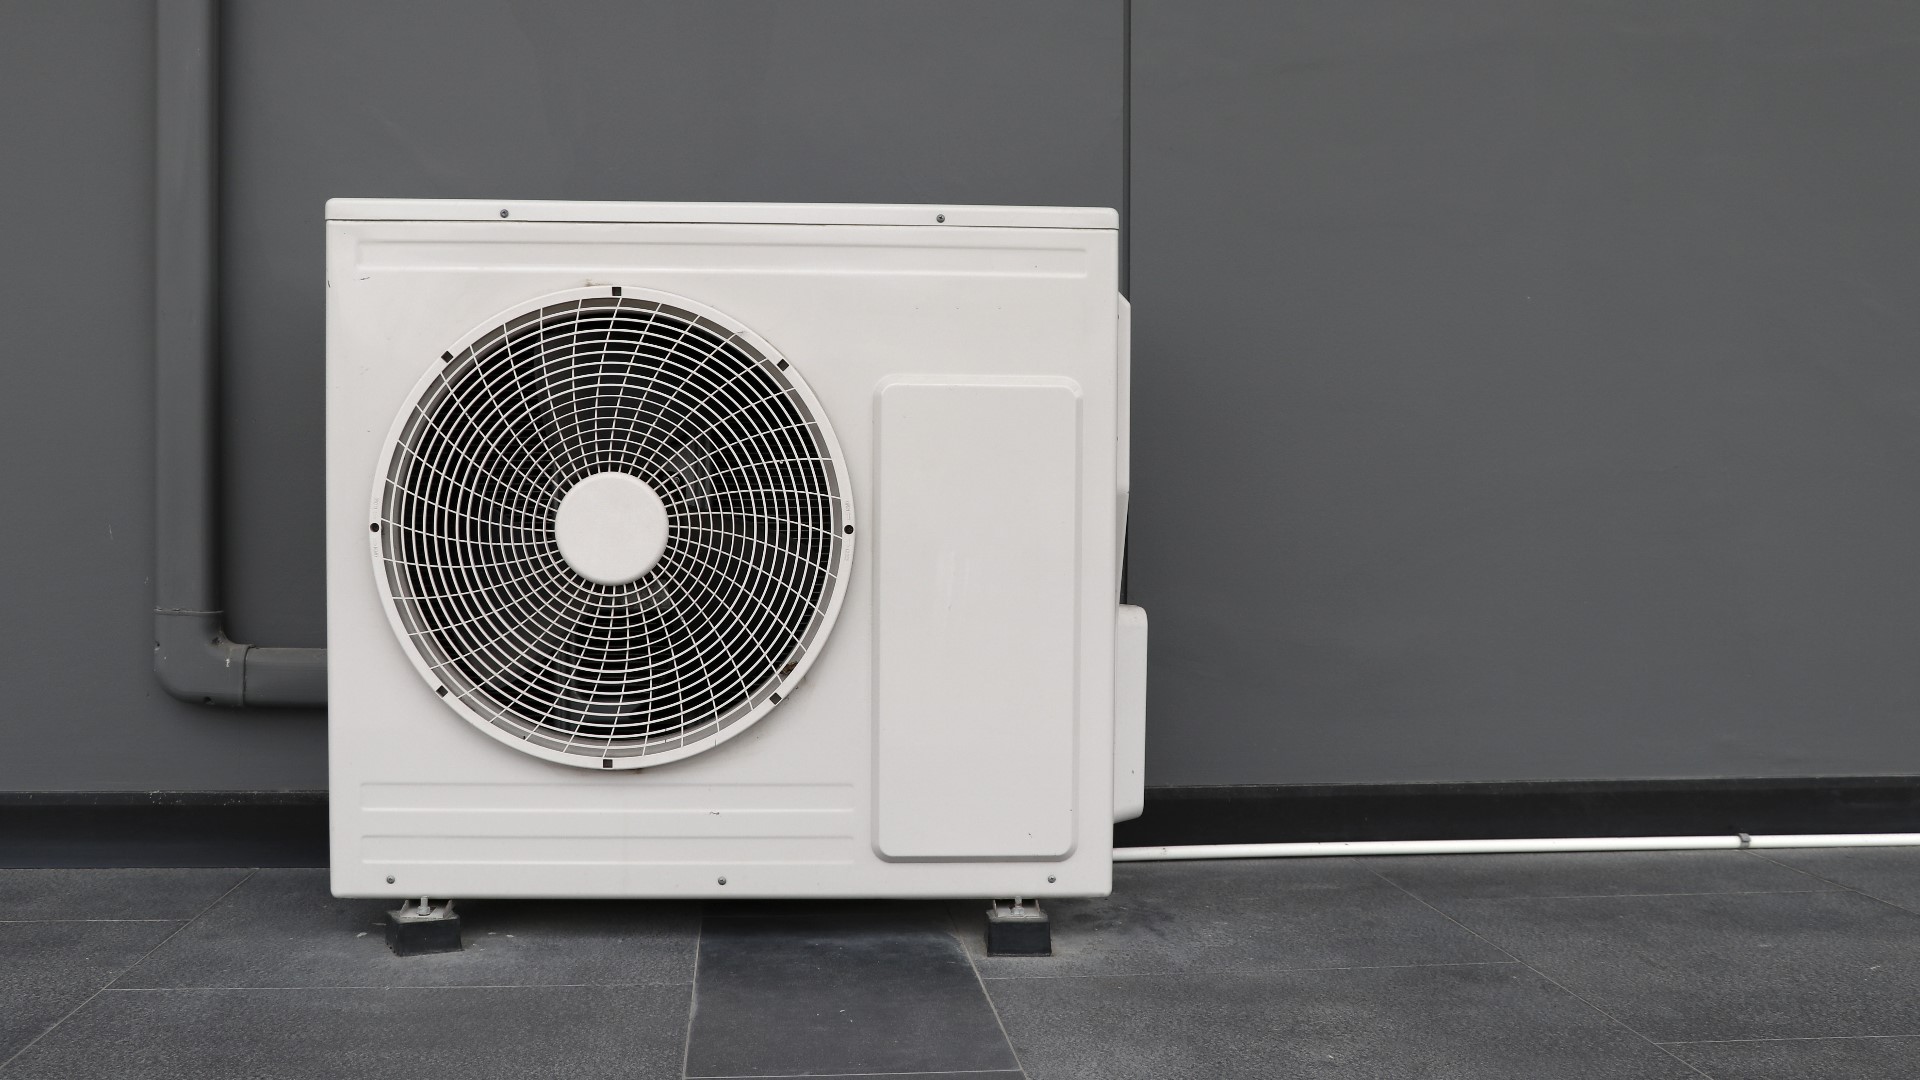 Kentuckiana Regional Planning and Development Agency is partnering with Louisville Metro Government to distribute electric fans to people in seven counties.